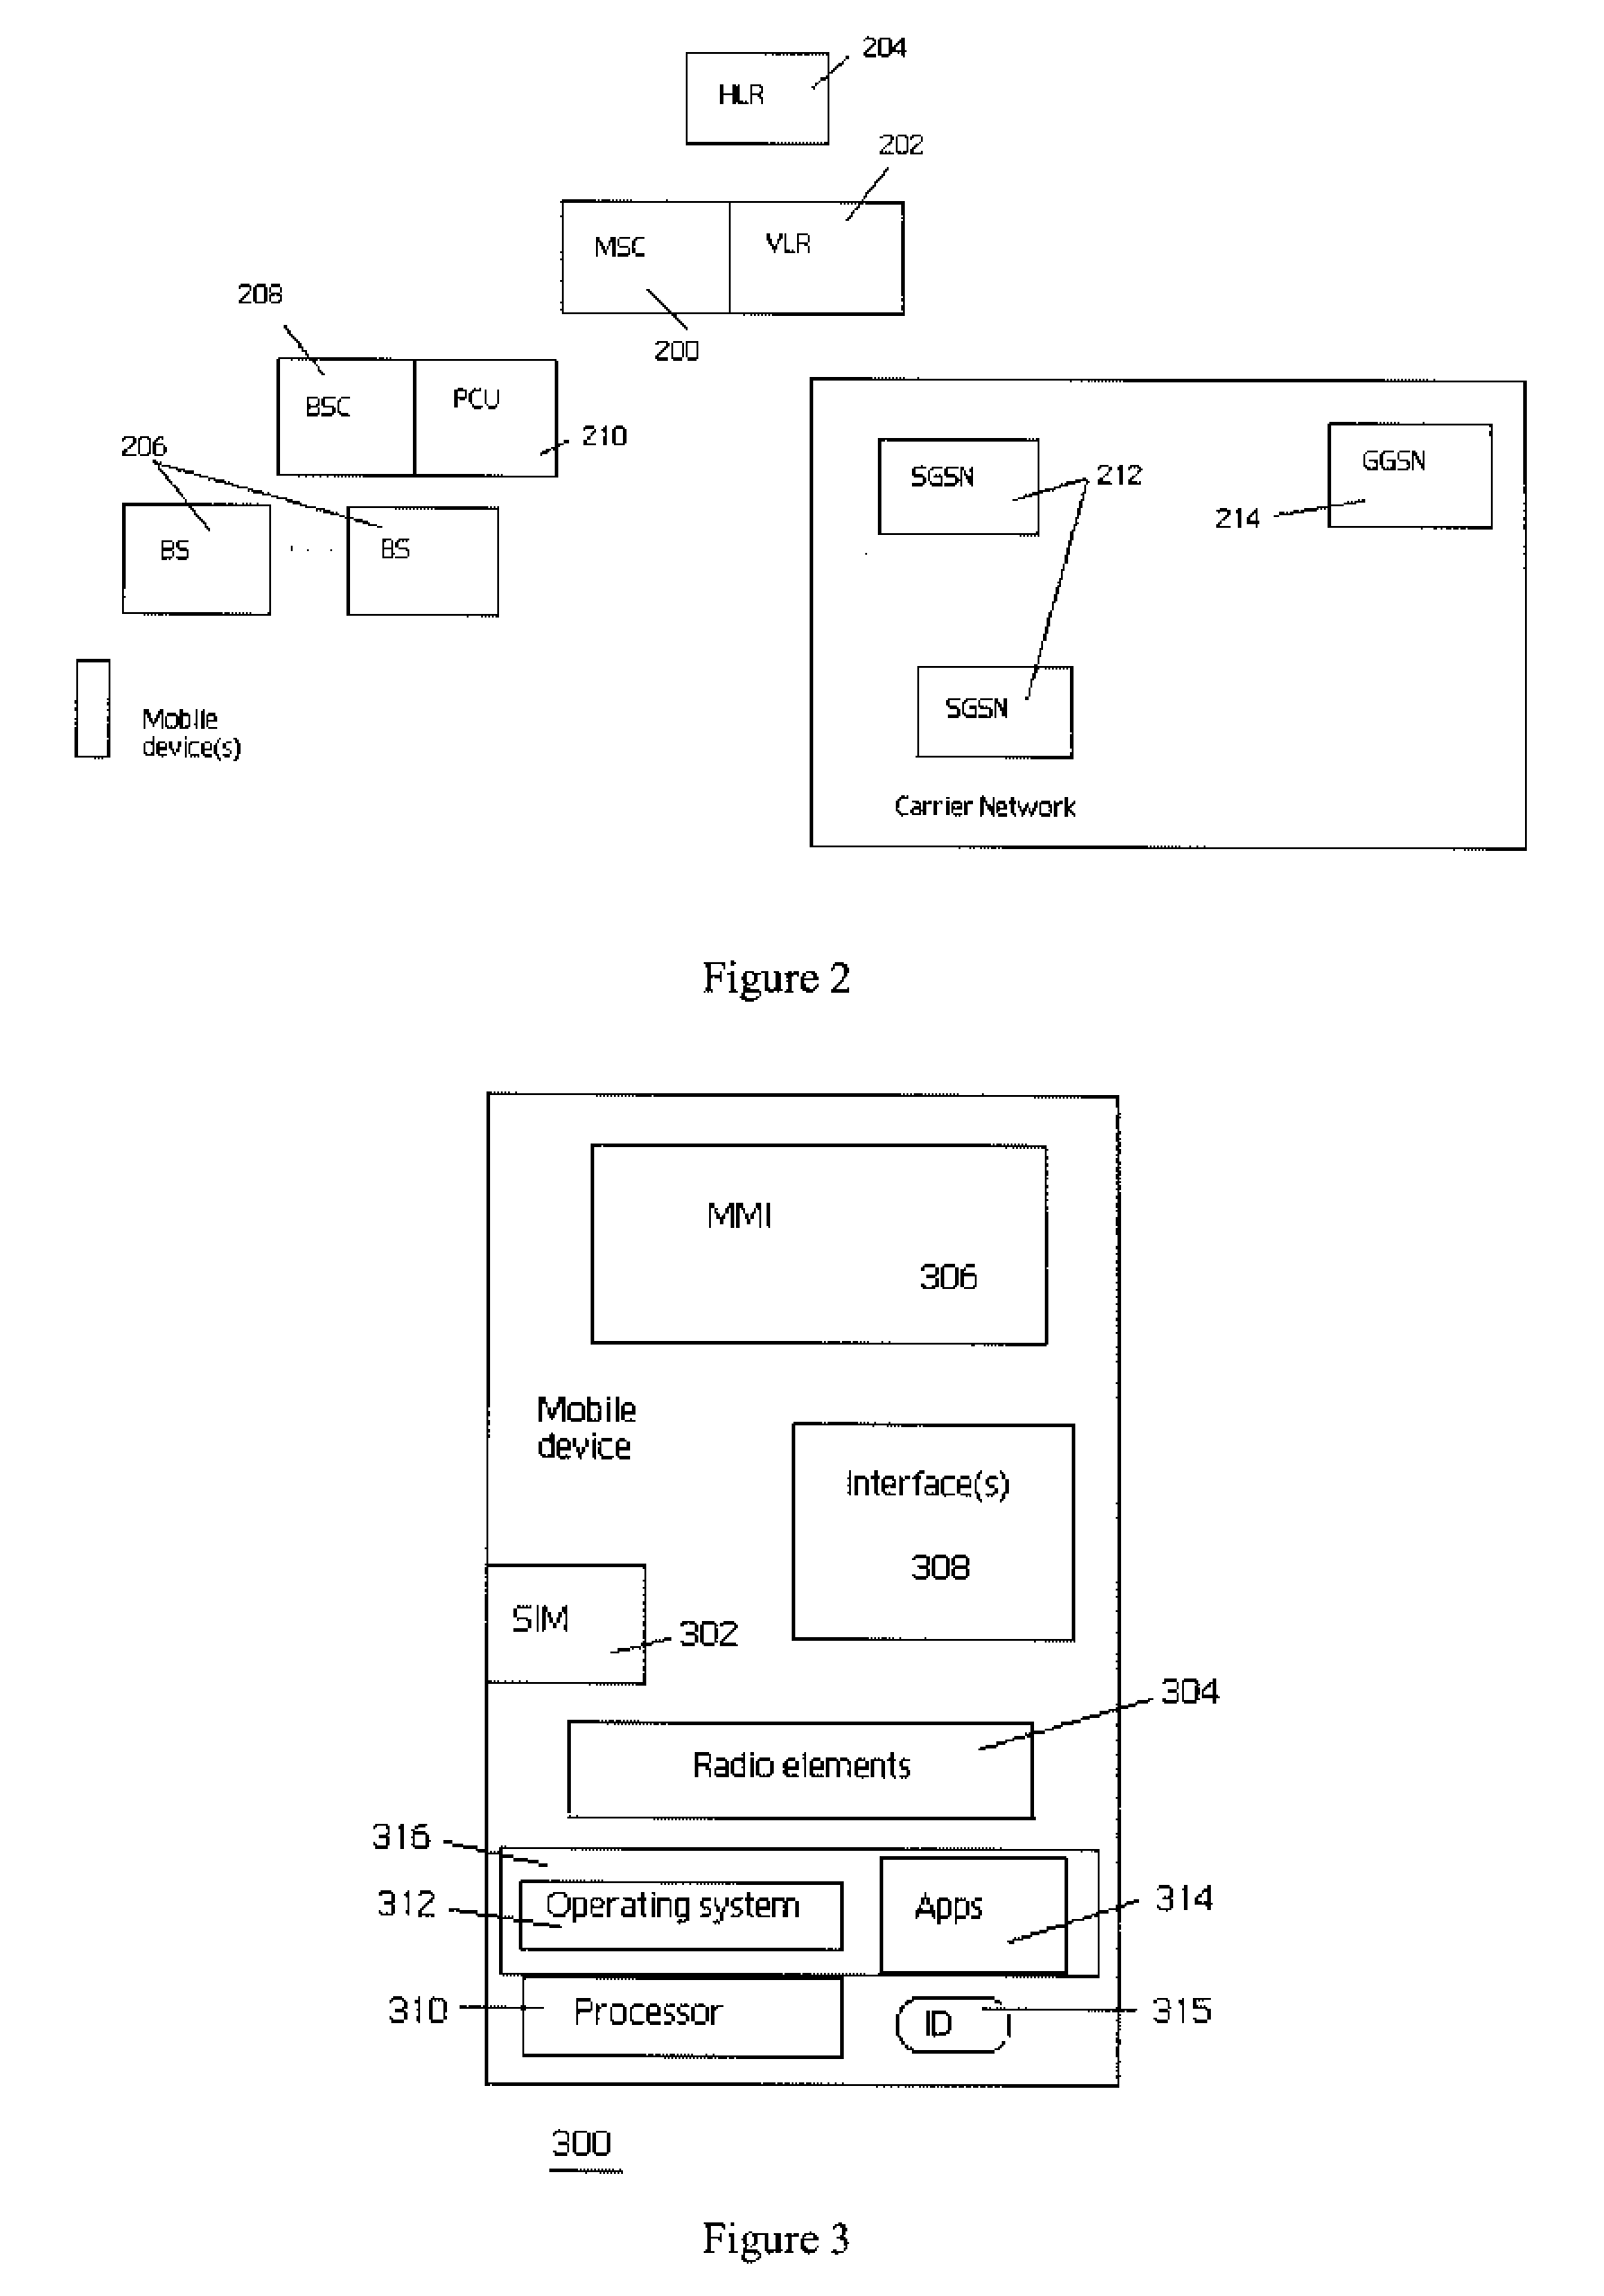 Mobile device with an obfuscated mobile device user identity